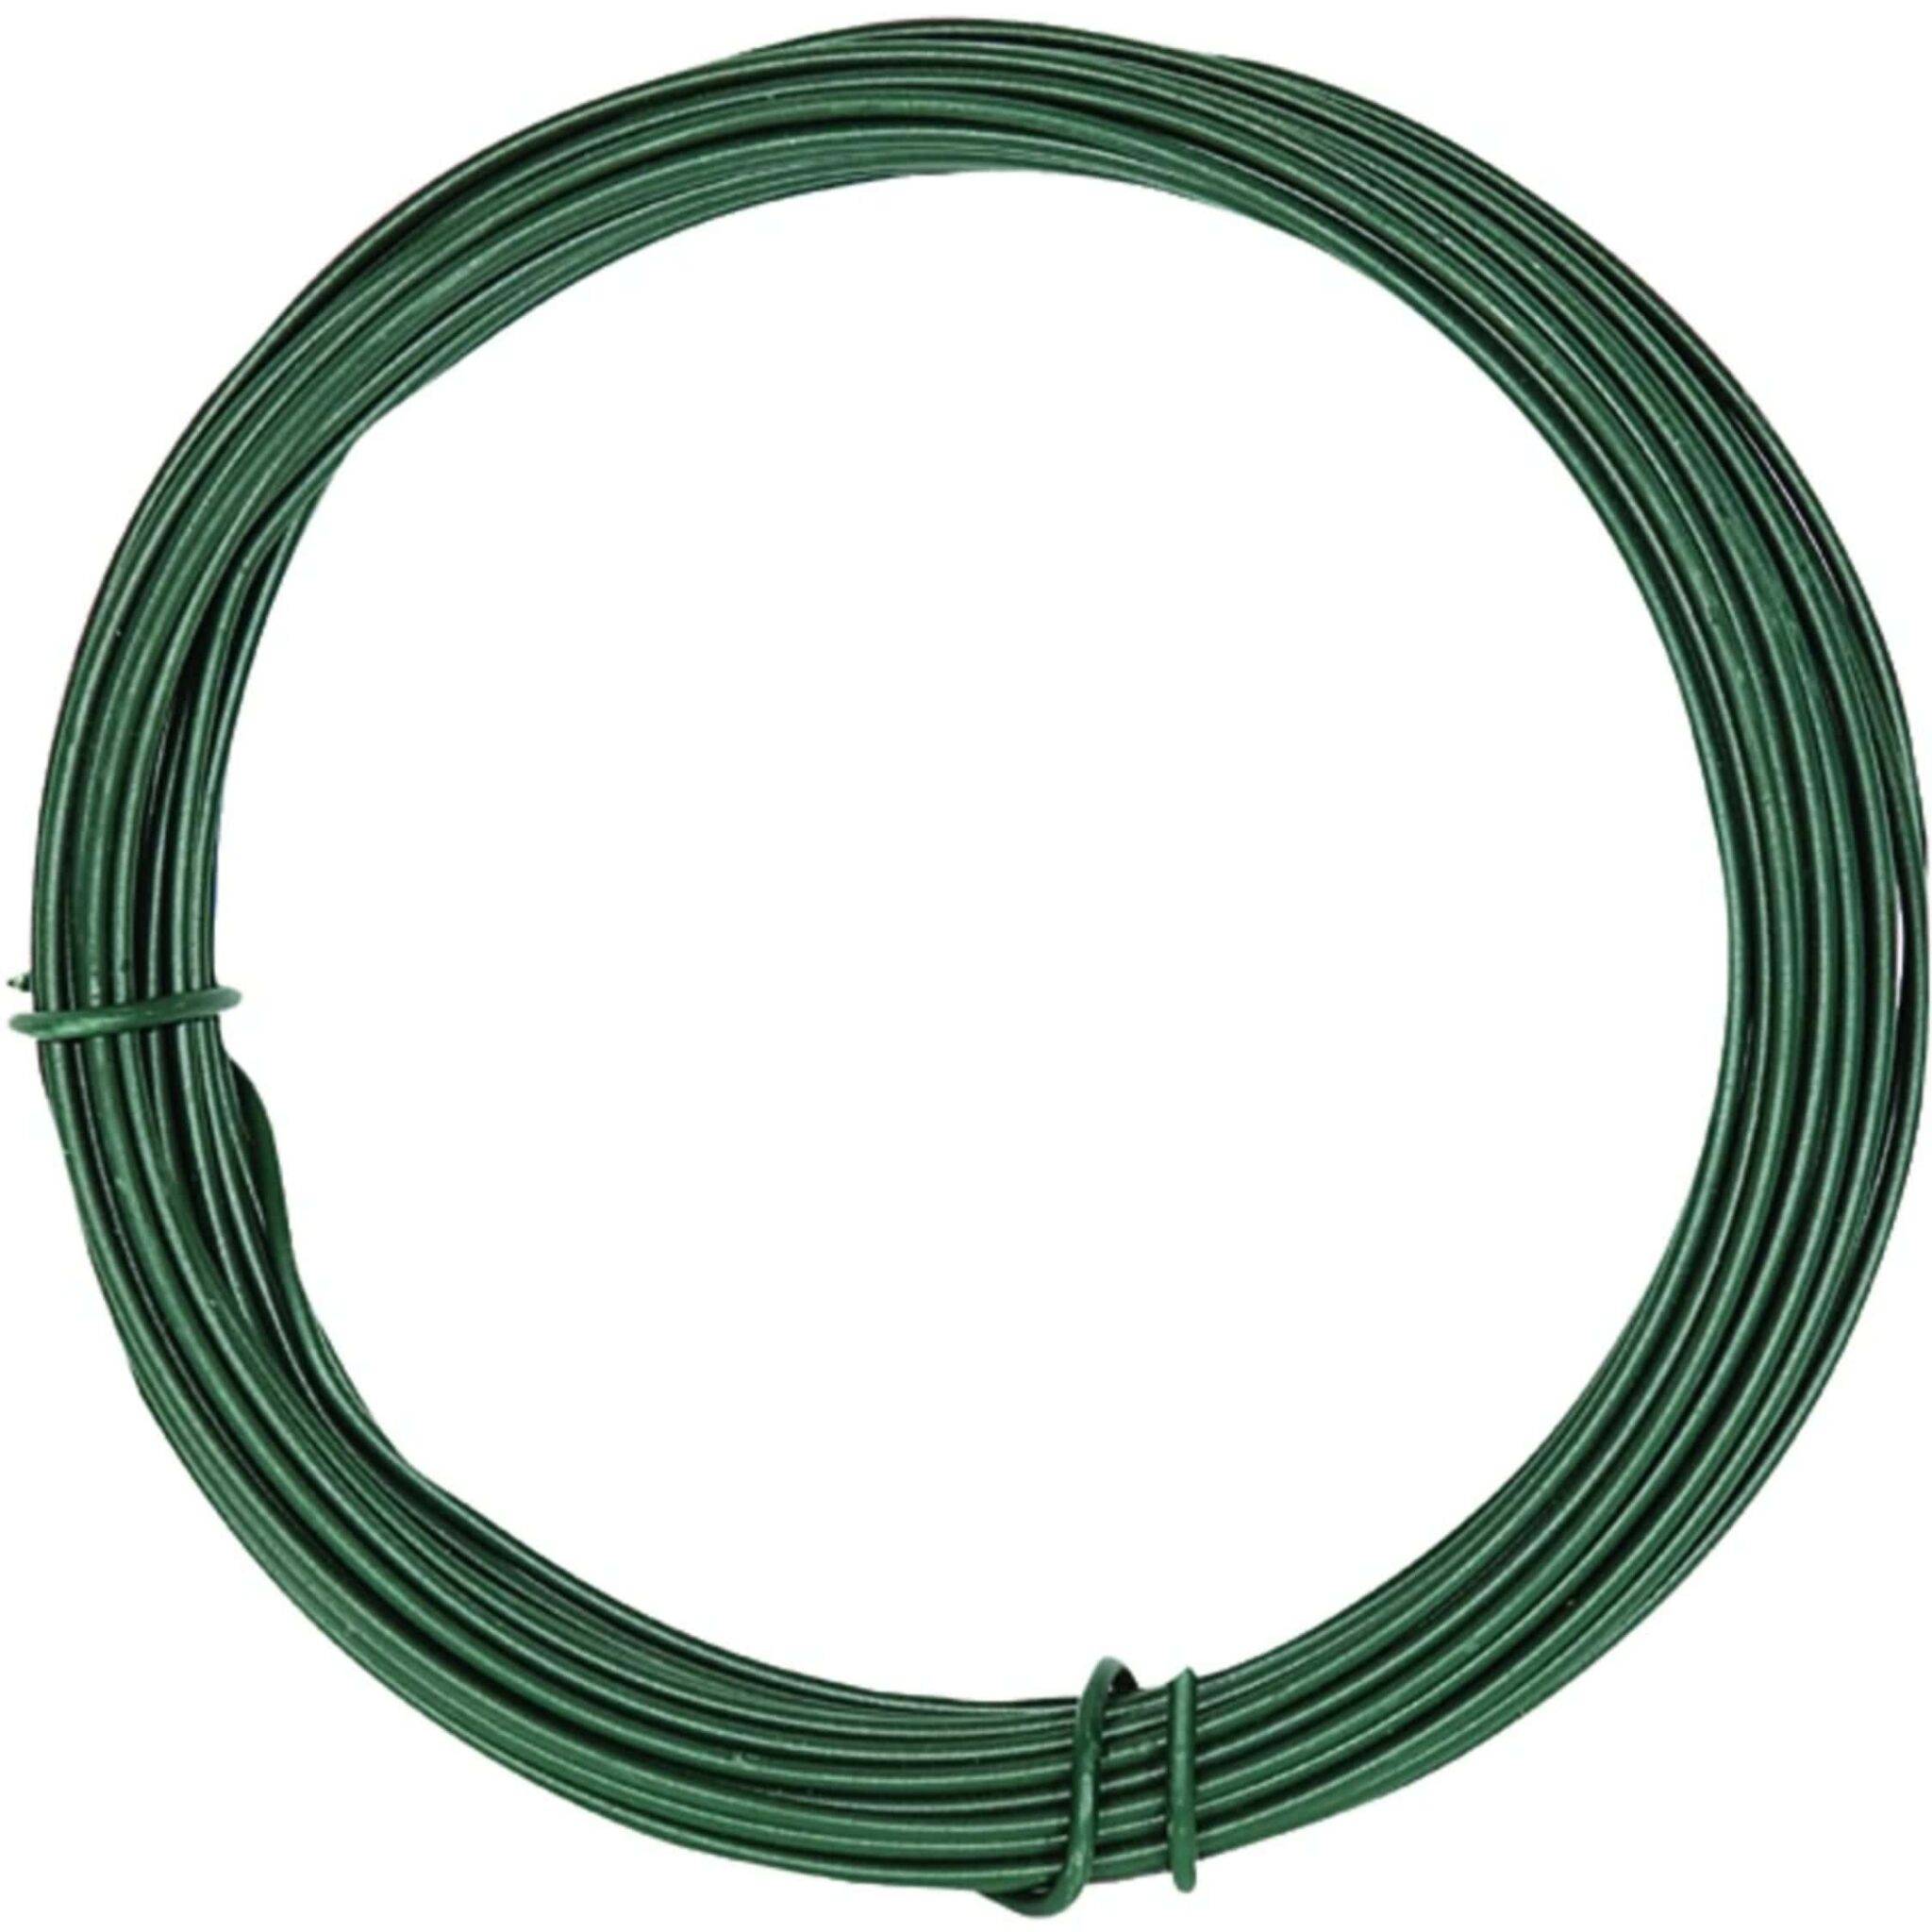 PVC Coated Binding Wire Suppliers in UAE